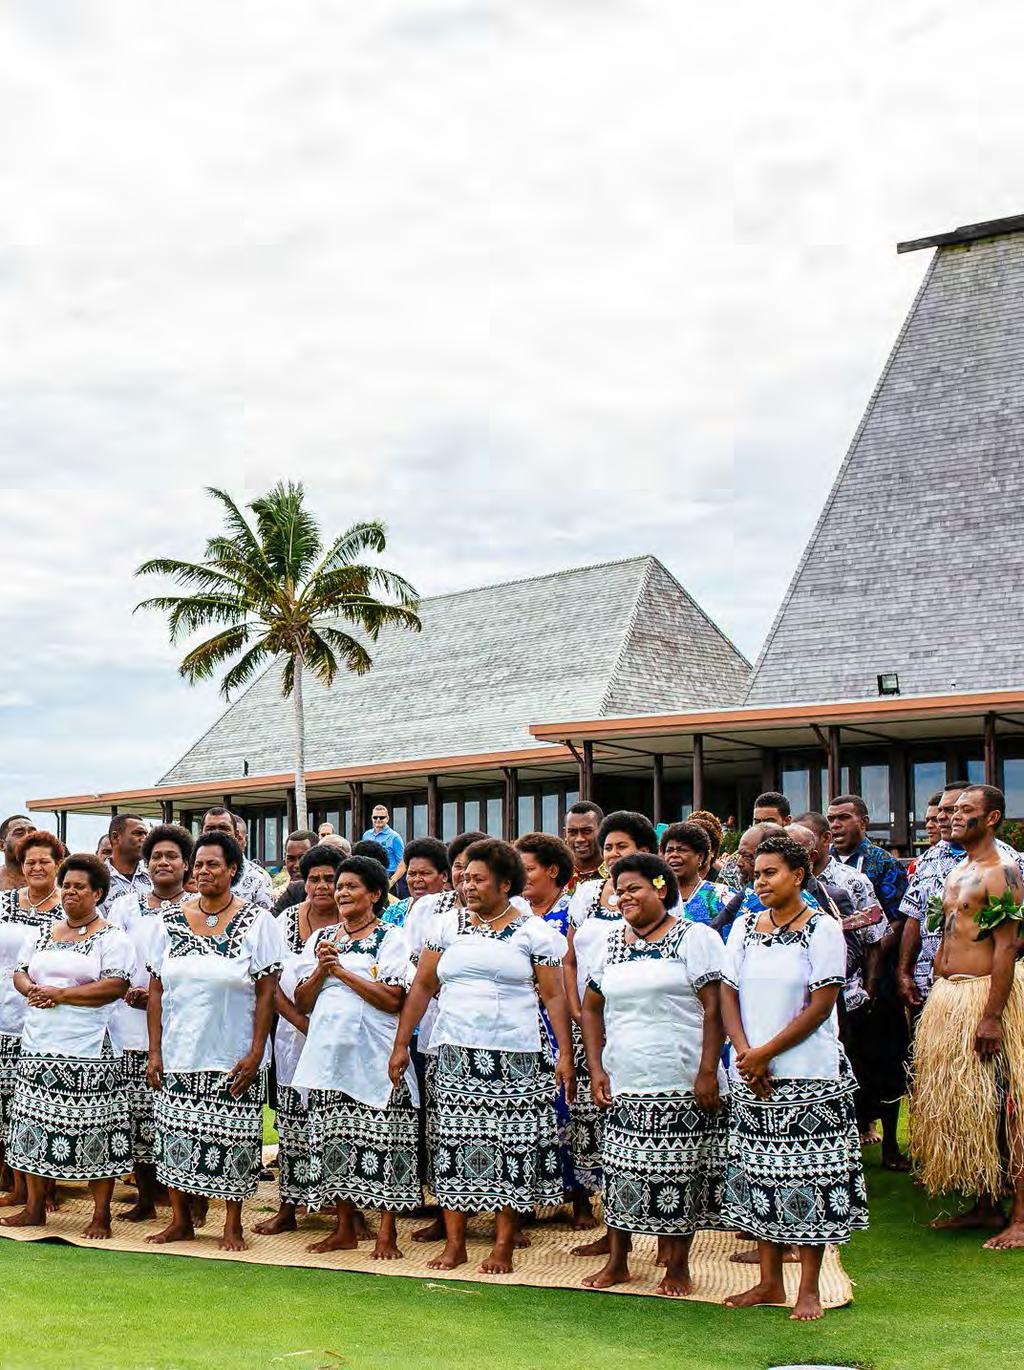 2014 TOURNAMENT WEEK ACTIVITIES MERCHANDISE AND FIJIAN MADE STAND The entrance to the event created a festive feel with spectators